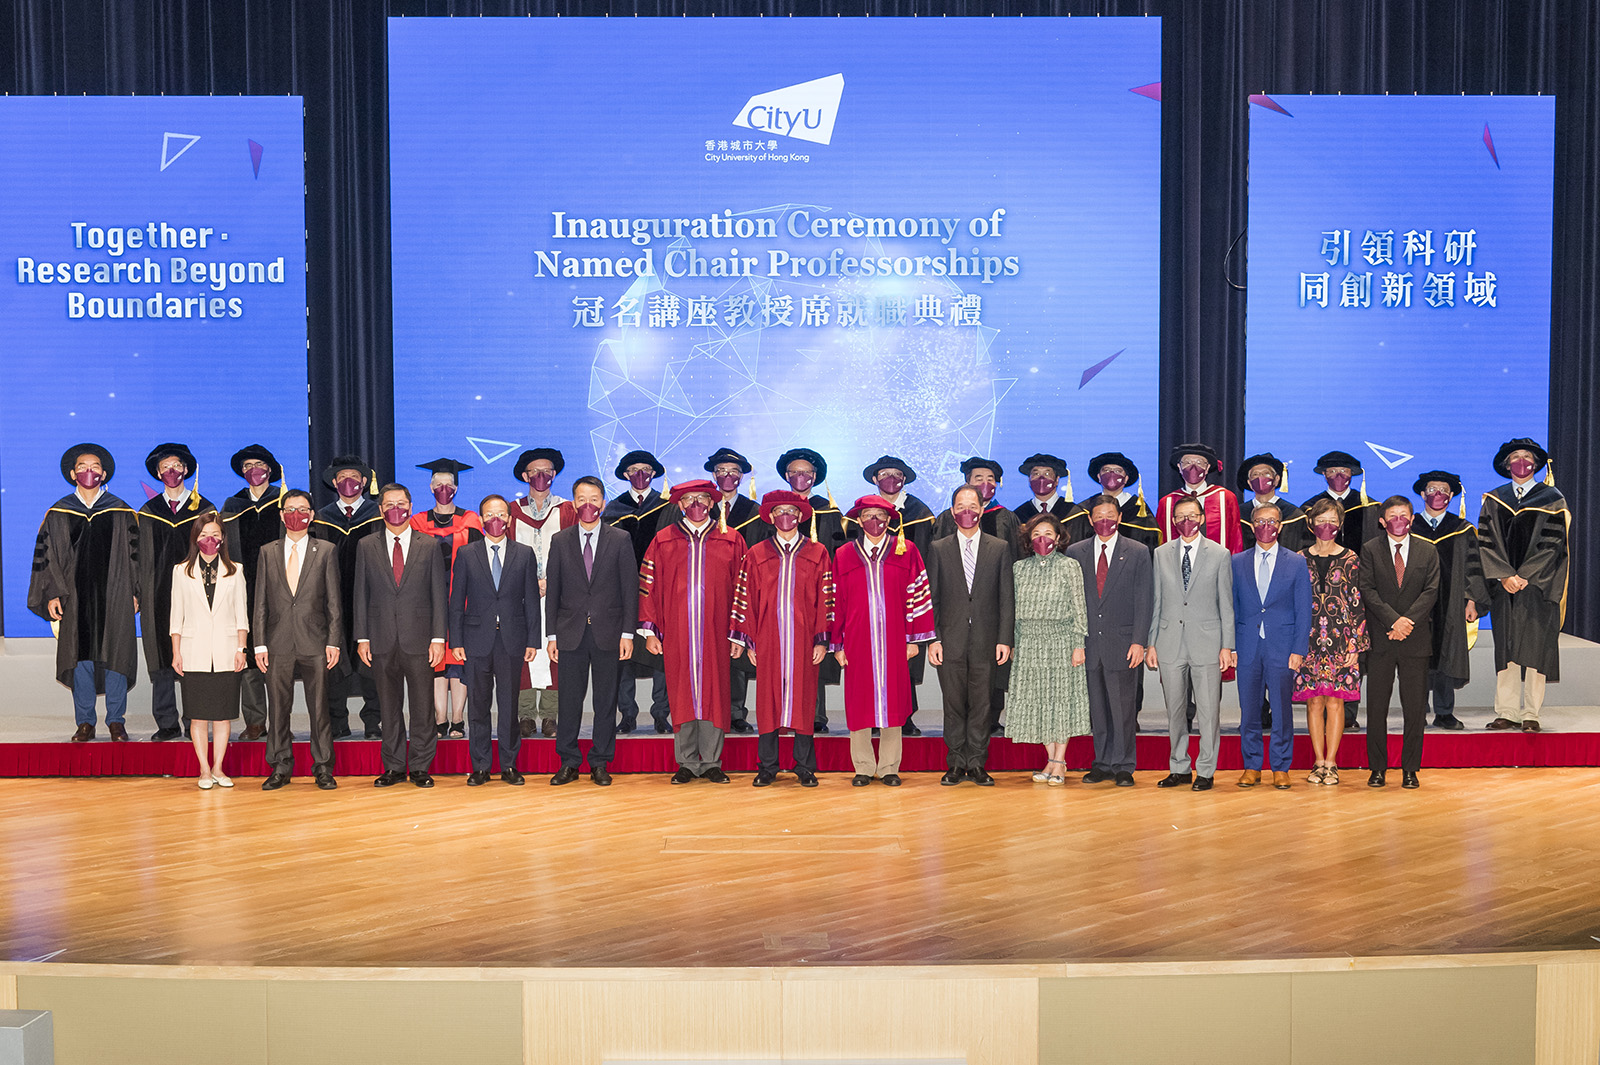 Distinguished donors and academics attend the Named Chair Professorships inauguration ceremony at CityU.